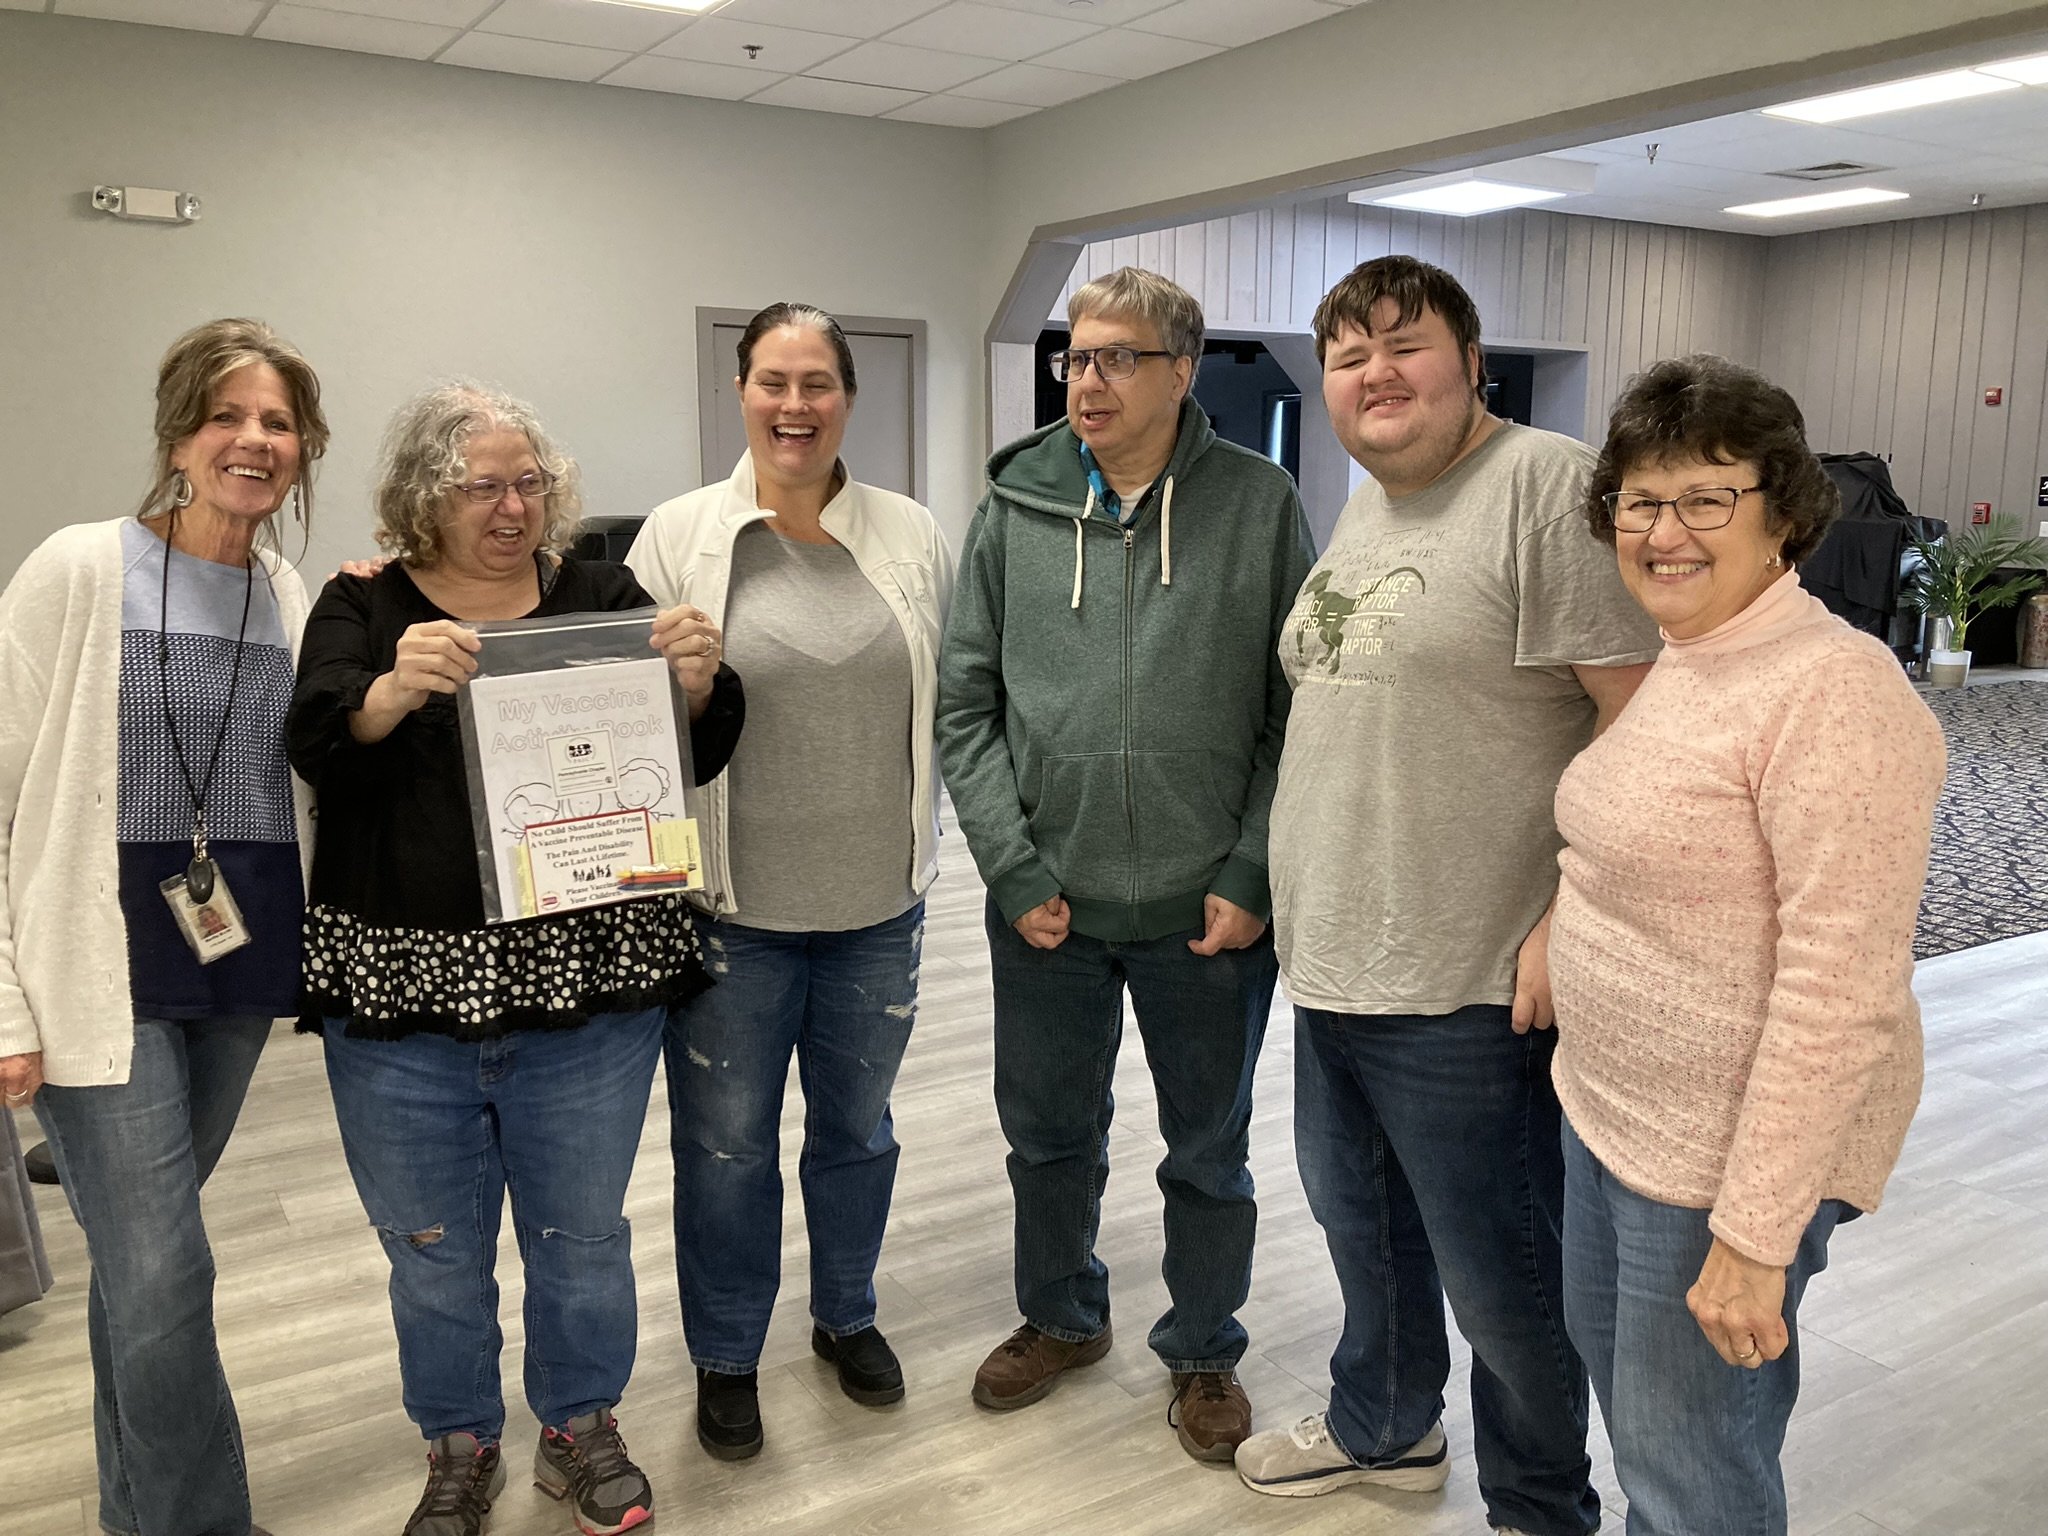  Disabled adults from the H.A.R.T. Center volunteered to assist PPSN in the packing of more than 1,200 Pediatric Vaccine Information Packets delivered to Pre-Schools and Day Care Centers. 